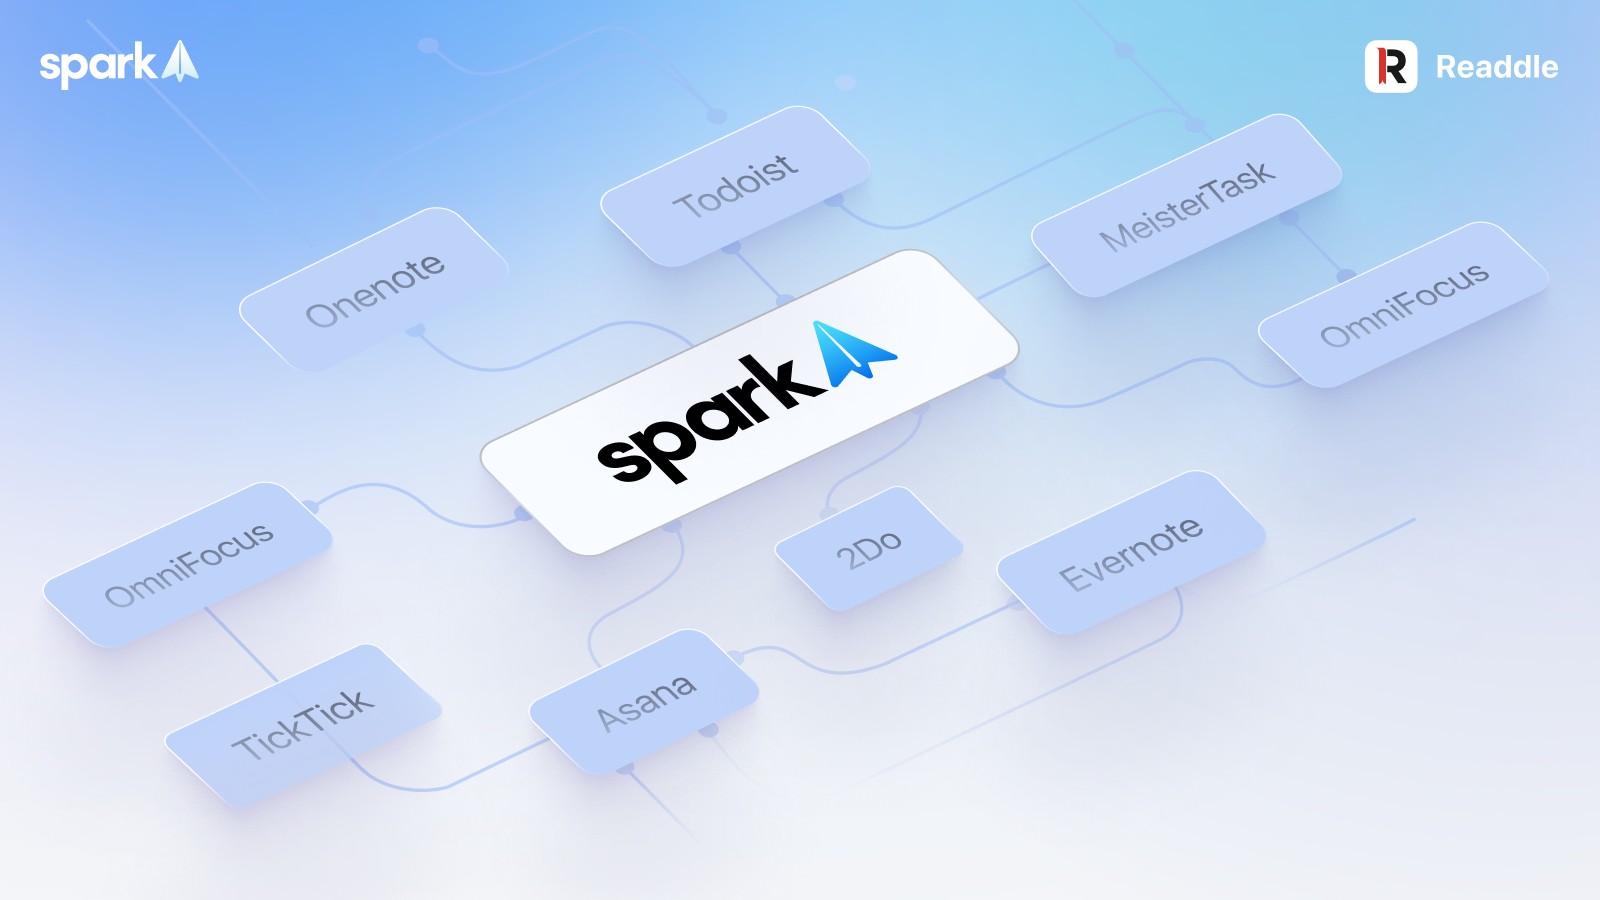 What Is Your Spark?